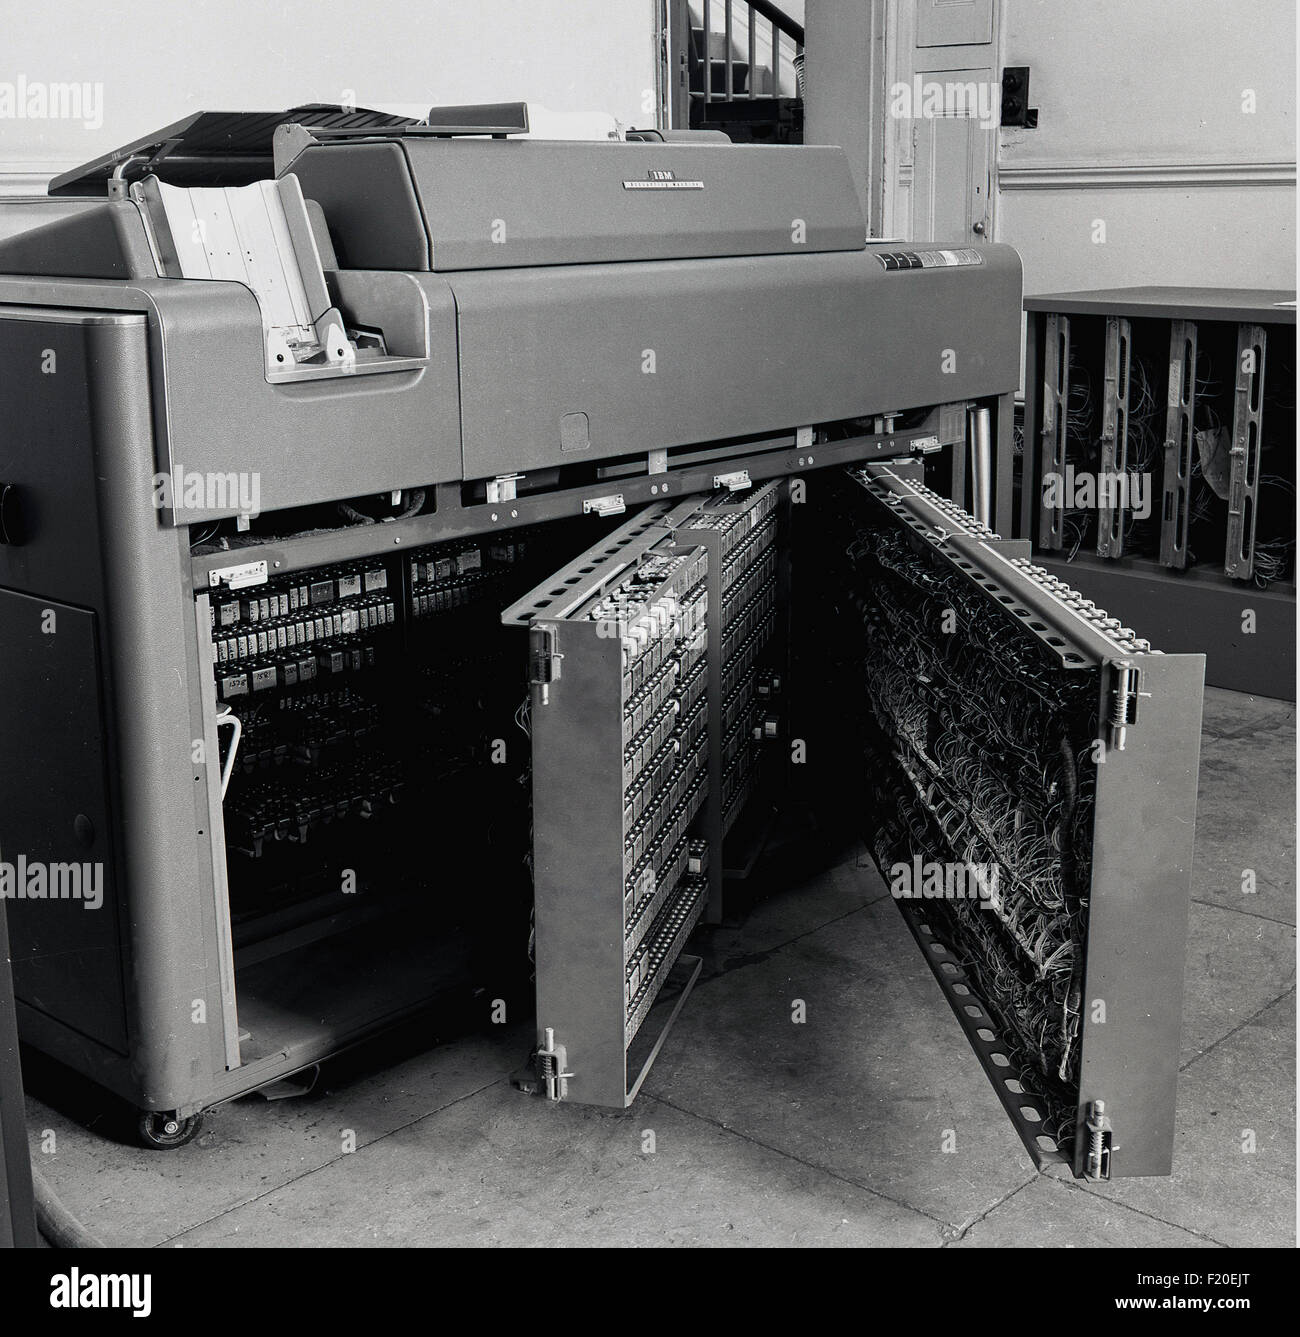 Historical, 1950s, an IBM 402 accounting machine, showing interior  control panels. This large tabulating machine by International Business Machines, read punched cards and was the standard way companies and governments stored and read information. Stock Photo